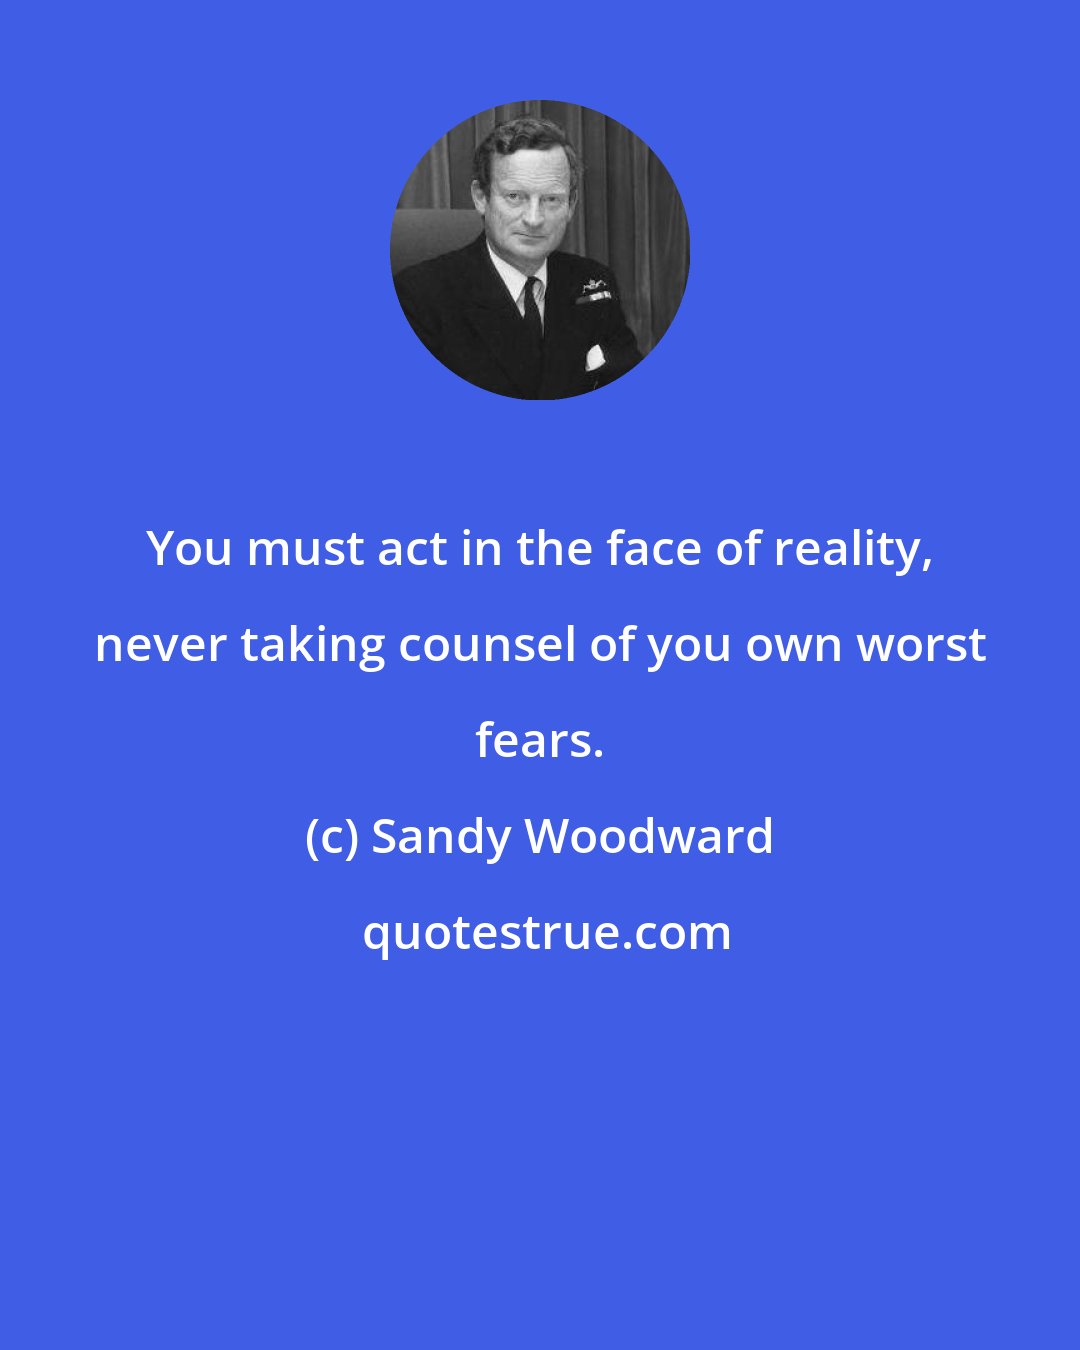 Sandy Woodward: You must act in the face of reality, never taking counsel of you own worst fears.